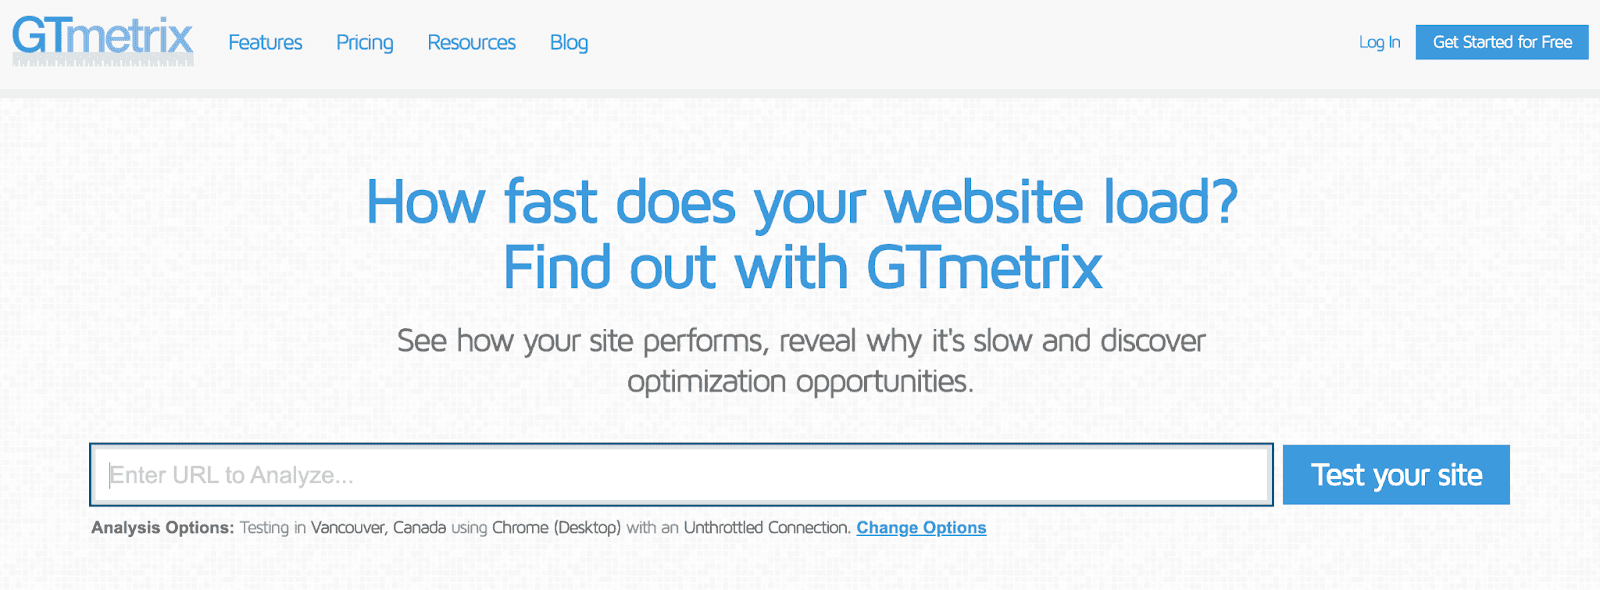 GTmetrix - How fast does your website load? Find out with GTmetrix